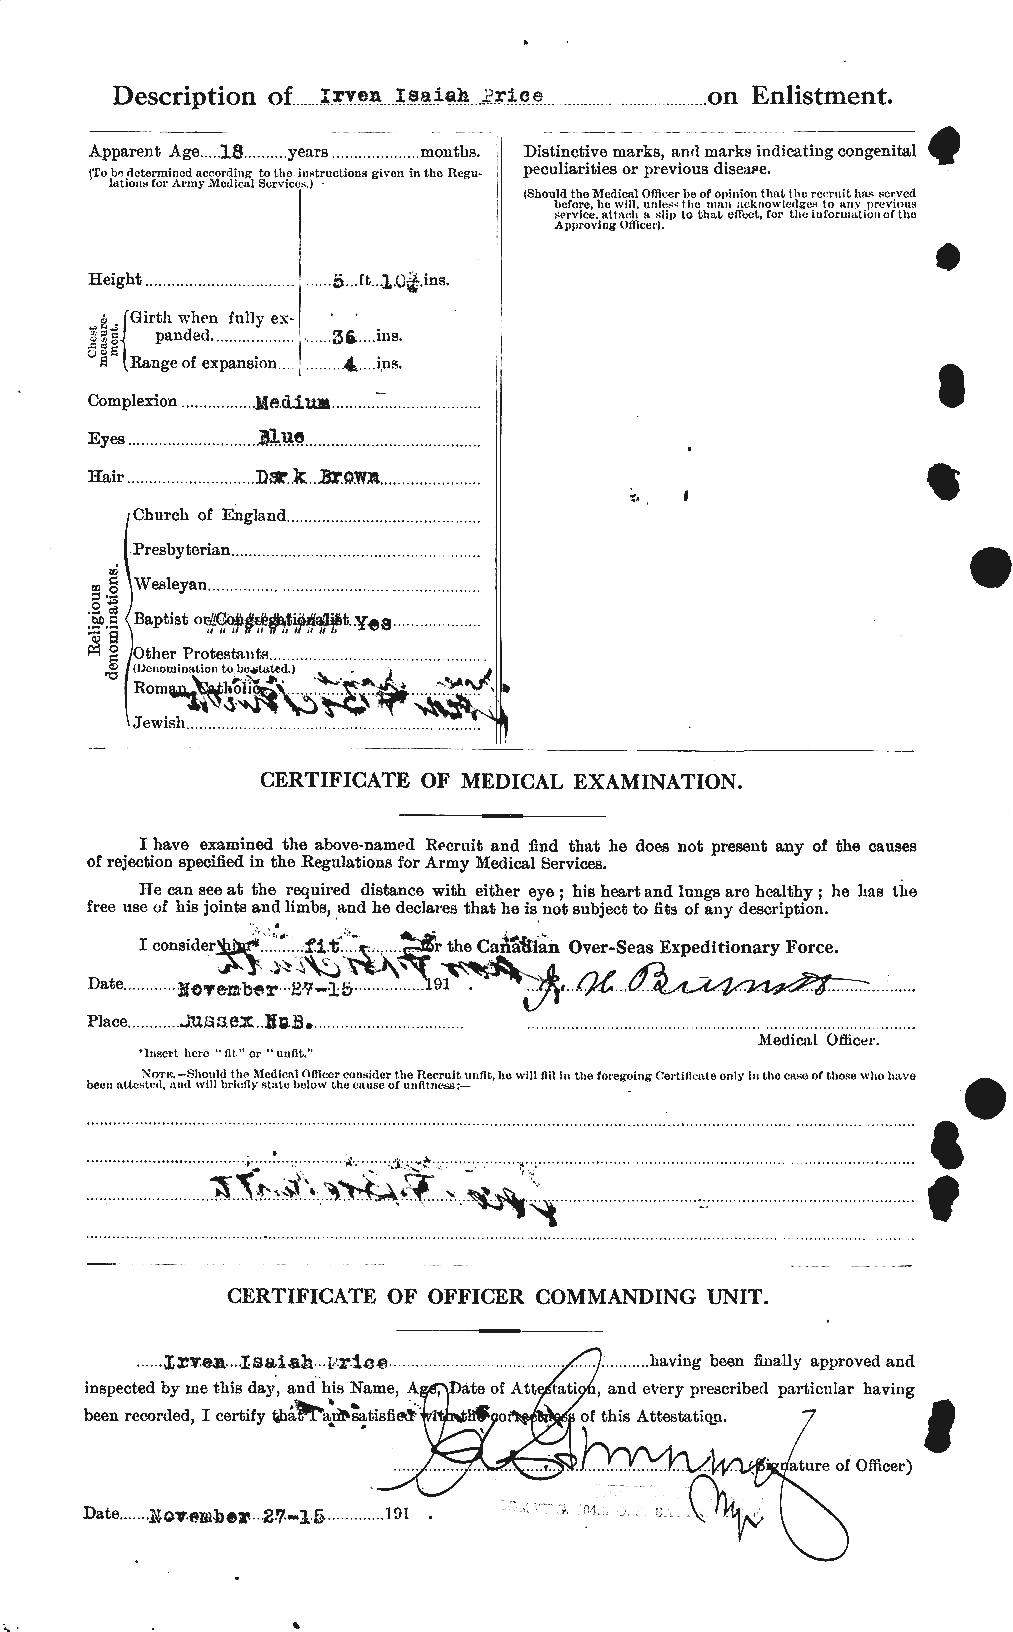 Personnel Records of the First World War - CEF 587184b